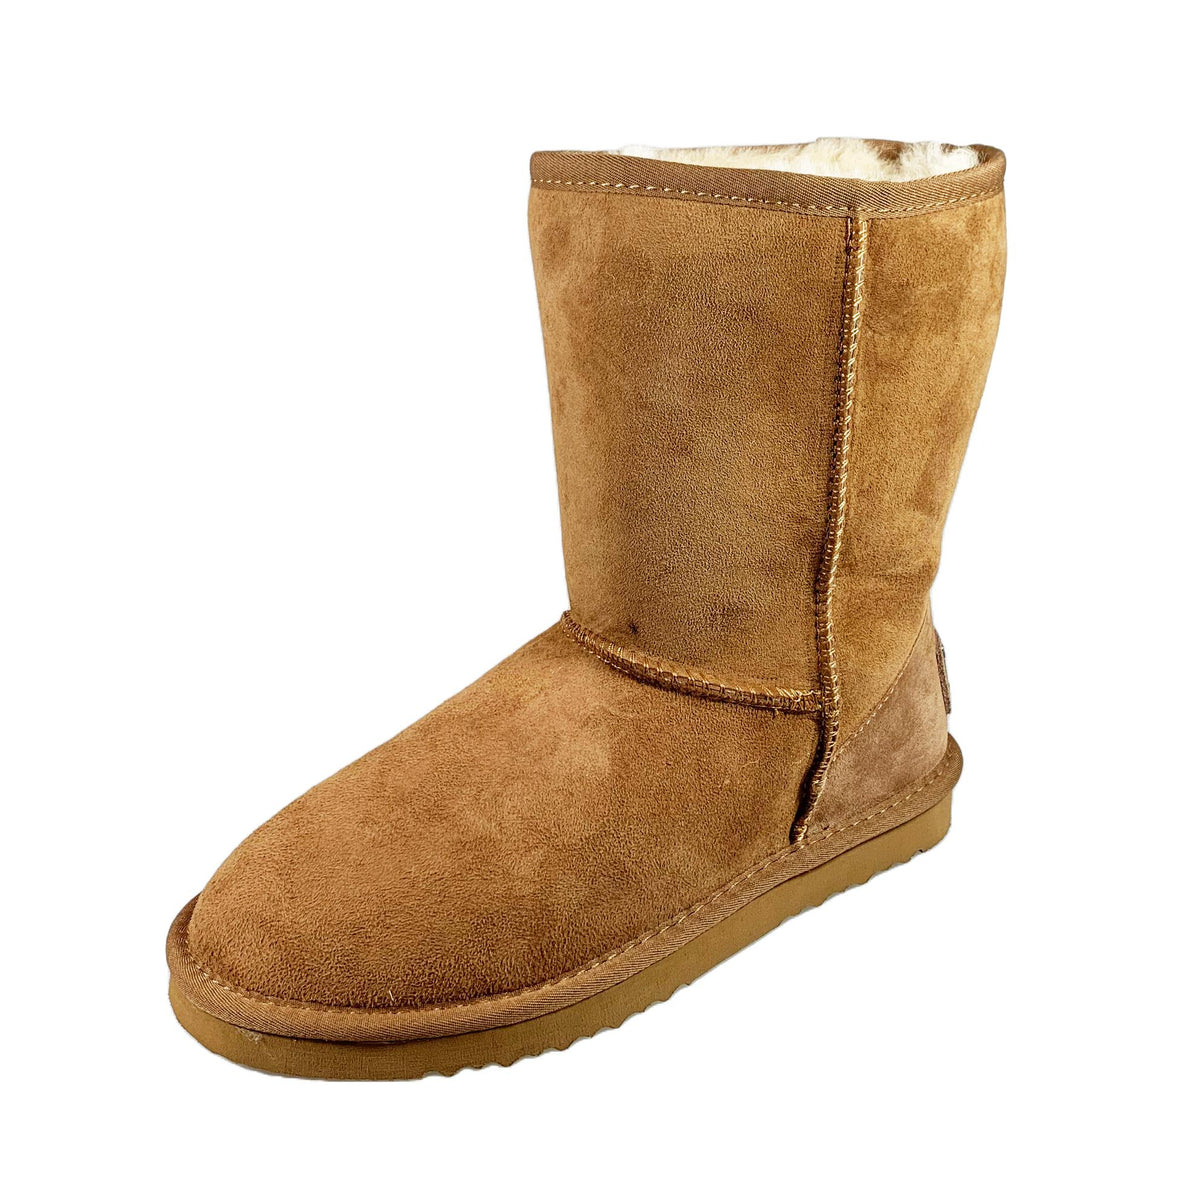 UOO Winter Boots with Fur Lining, Camel, Size US 7 Wide